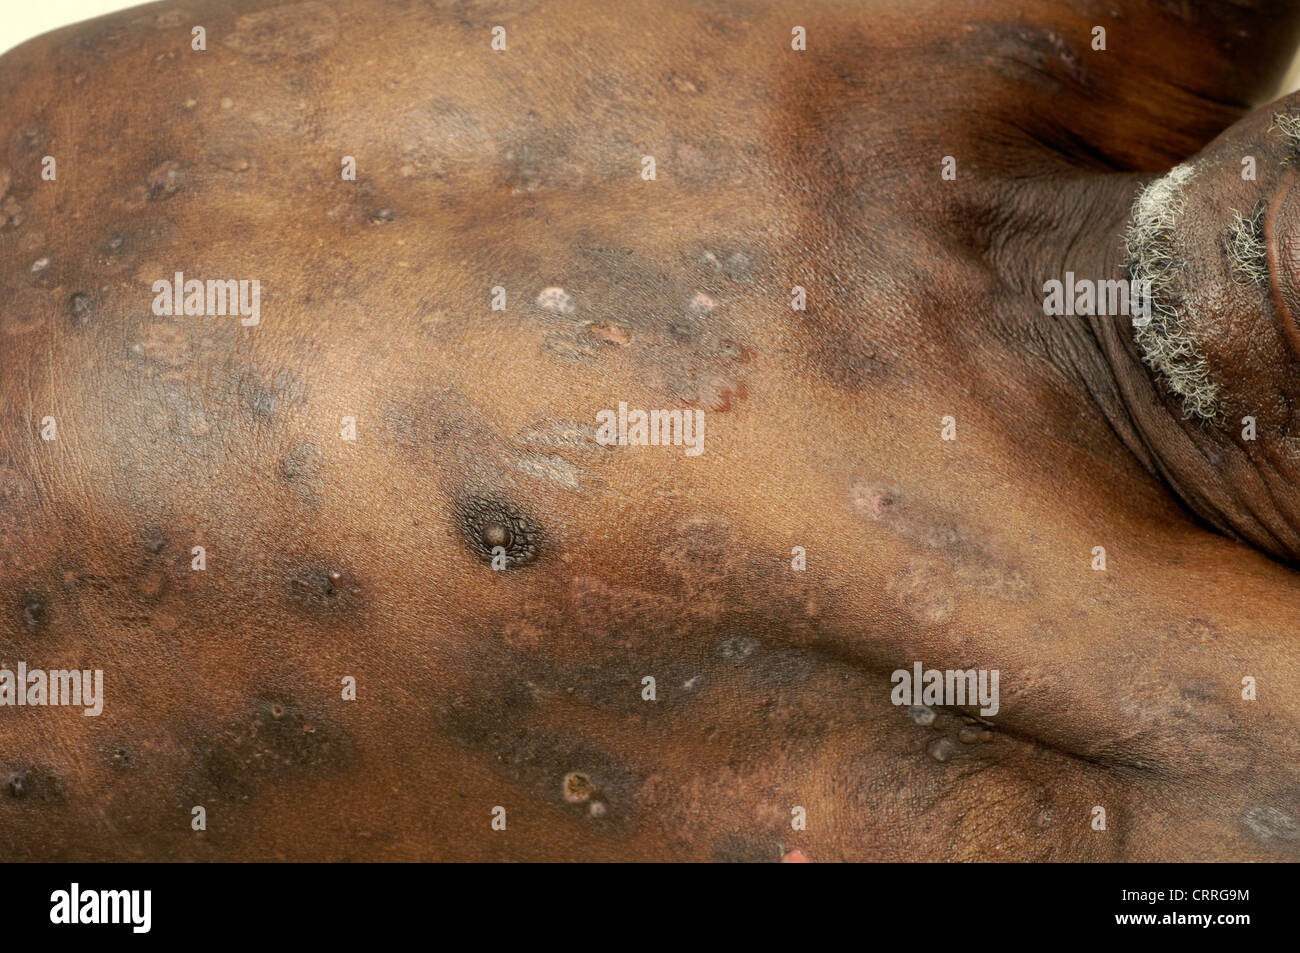 A man with a fungal skin disease. Stock Photo